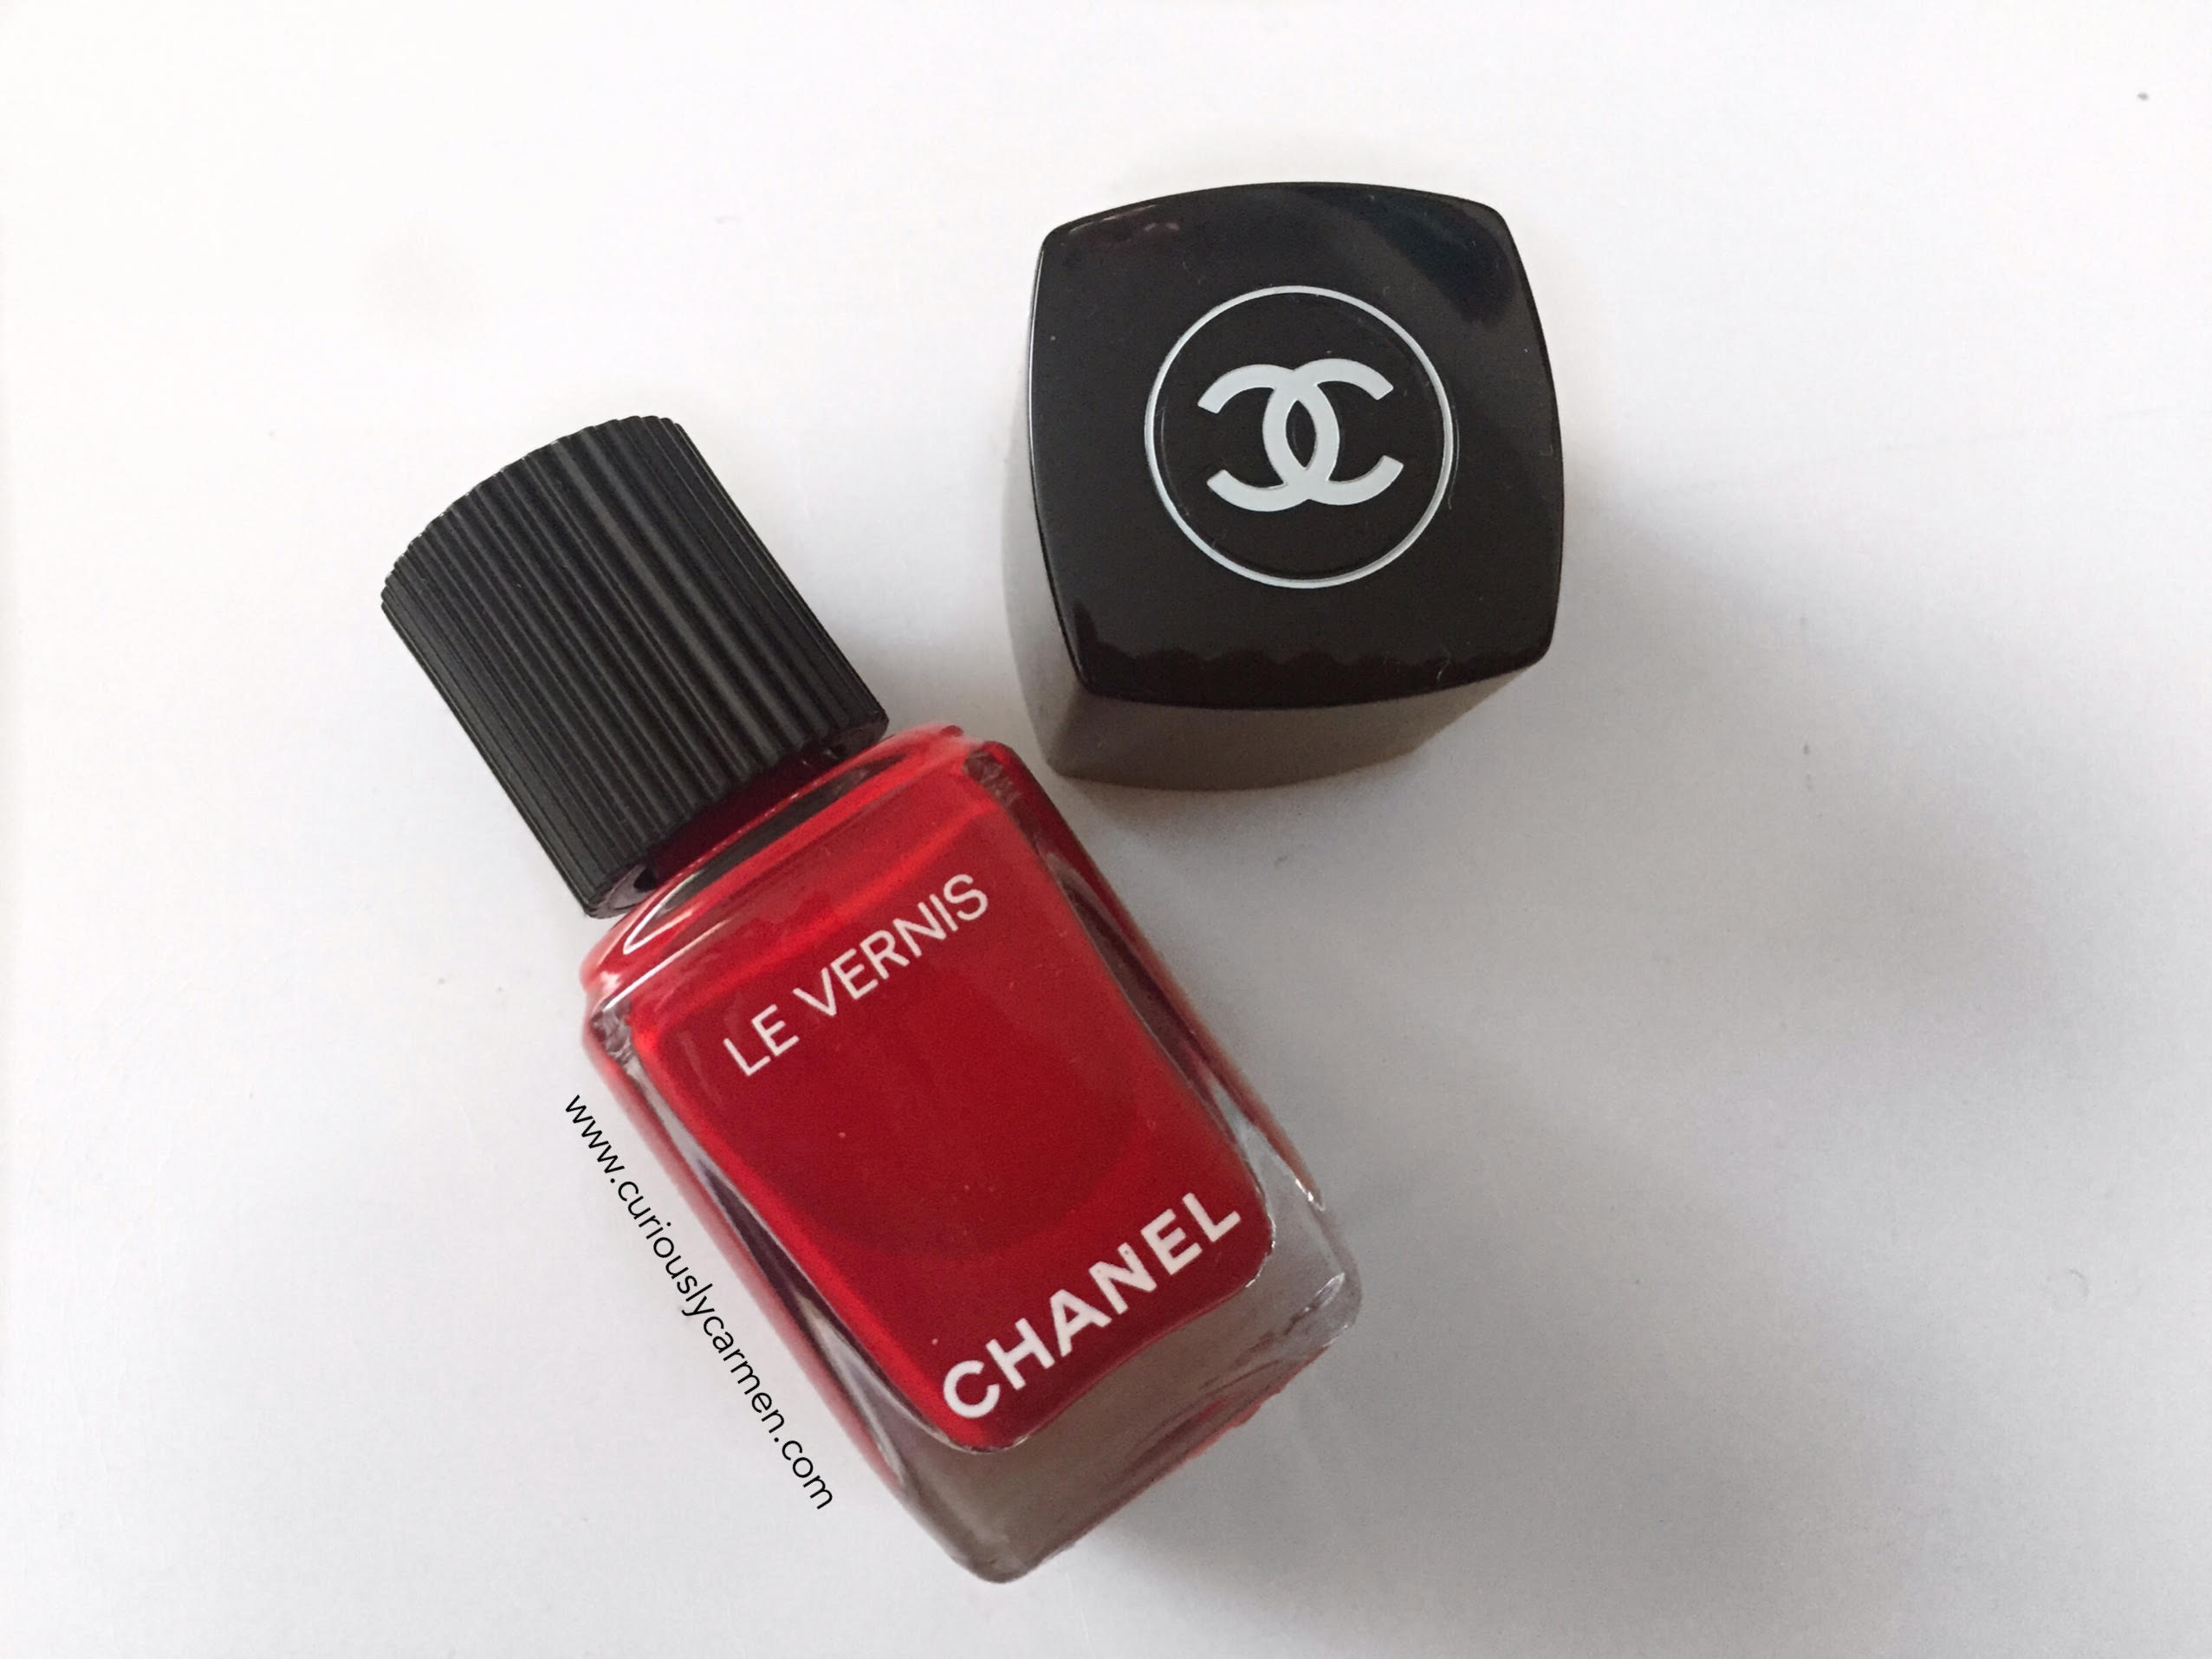 Le Vernis Beverly